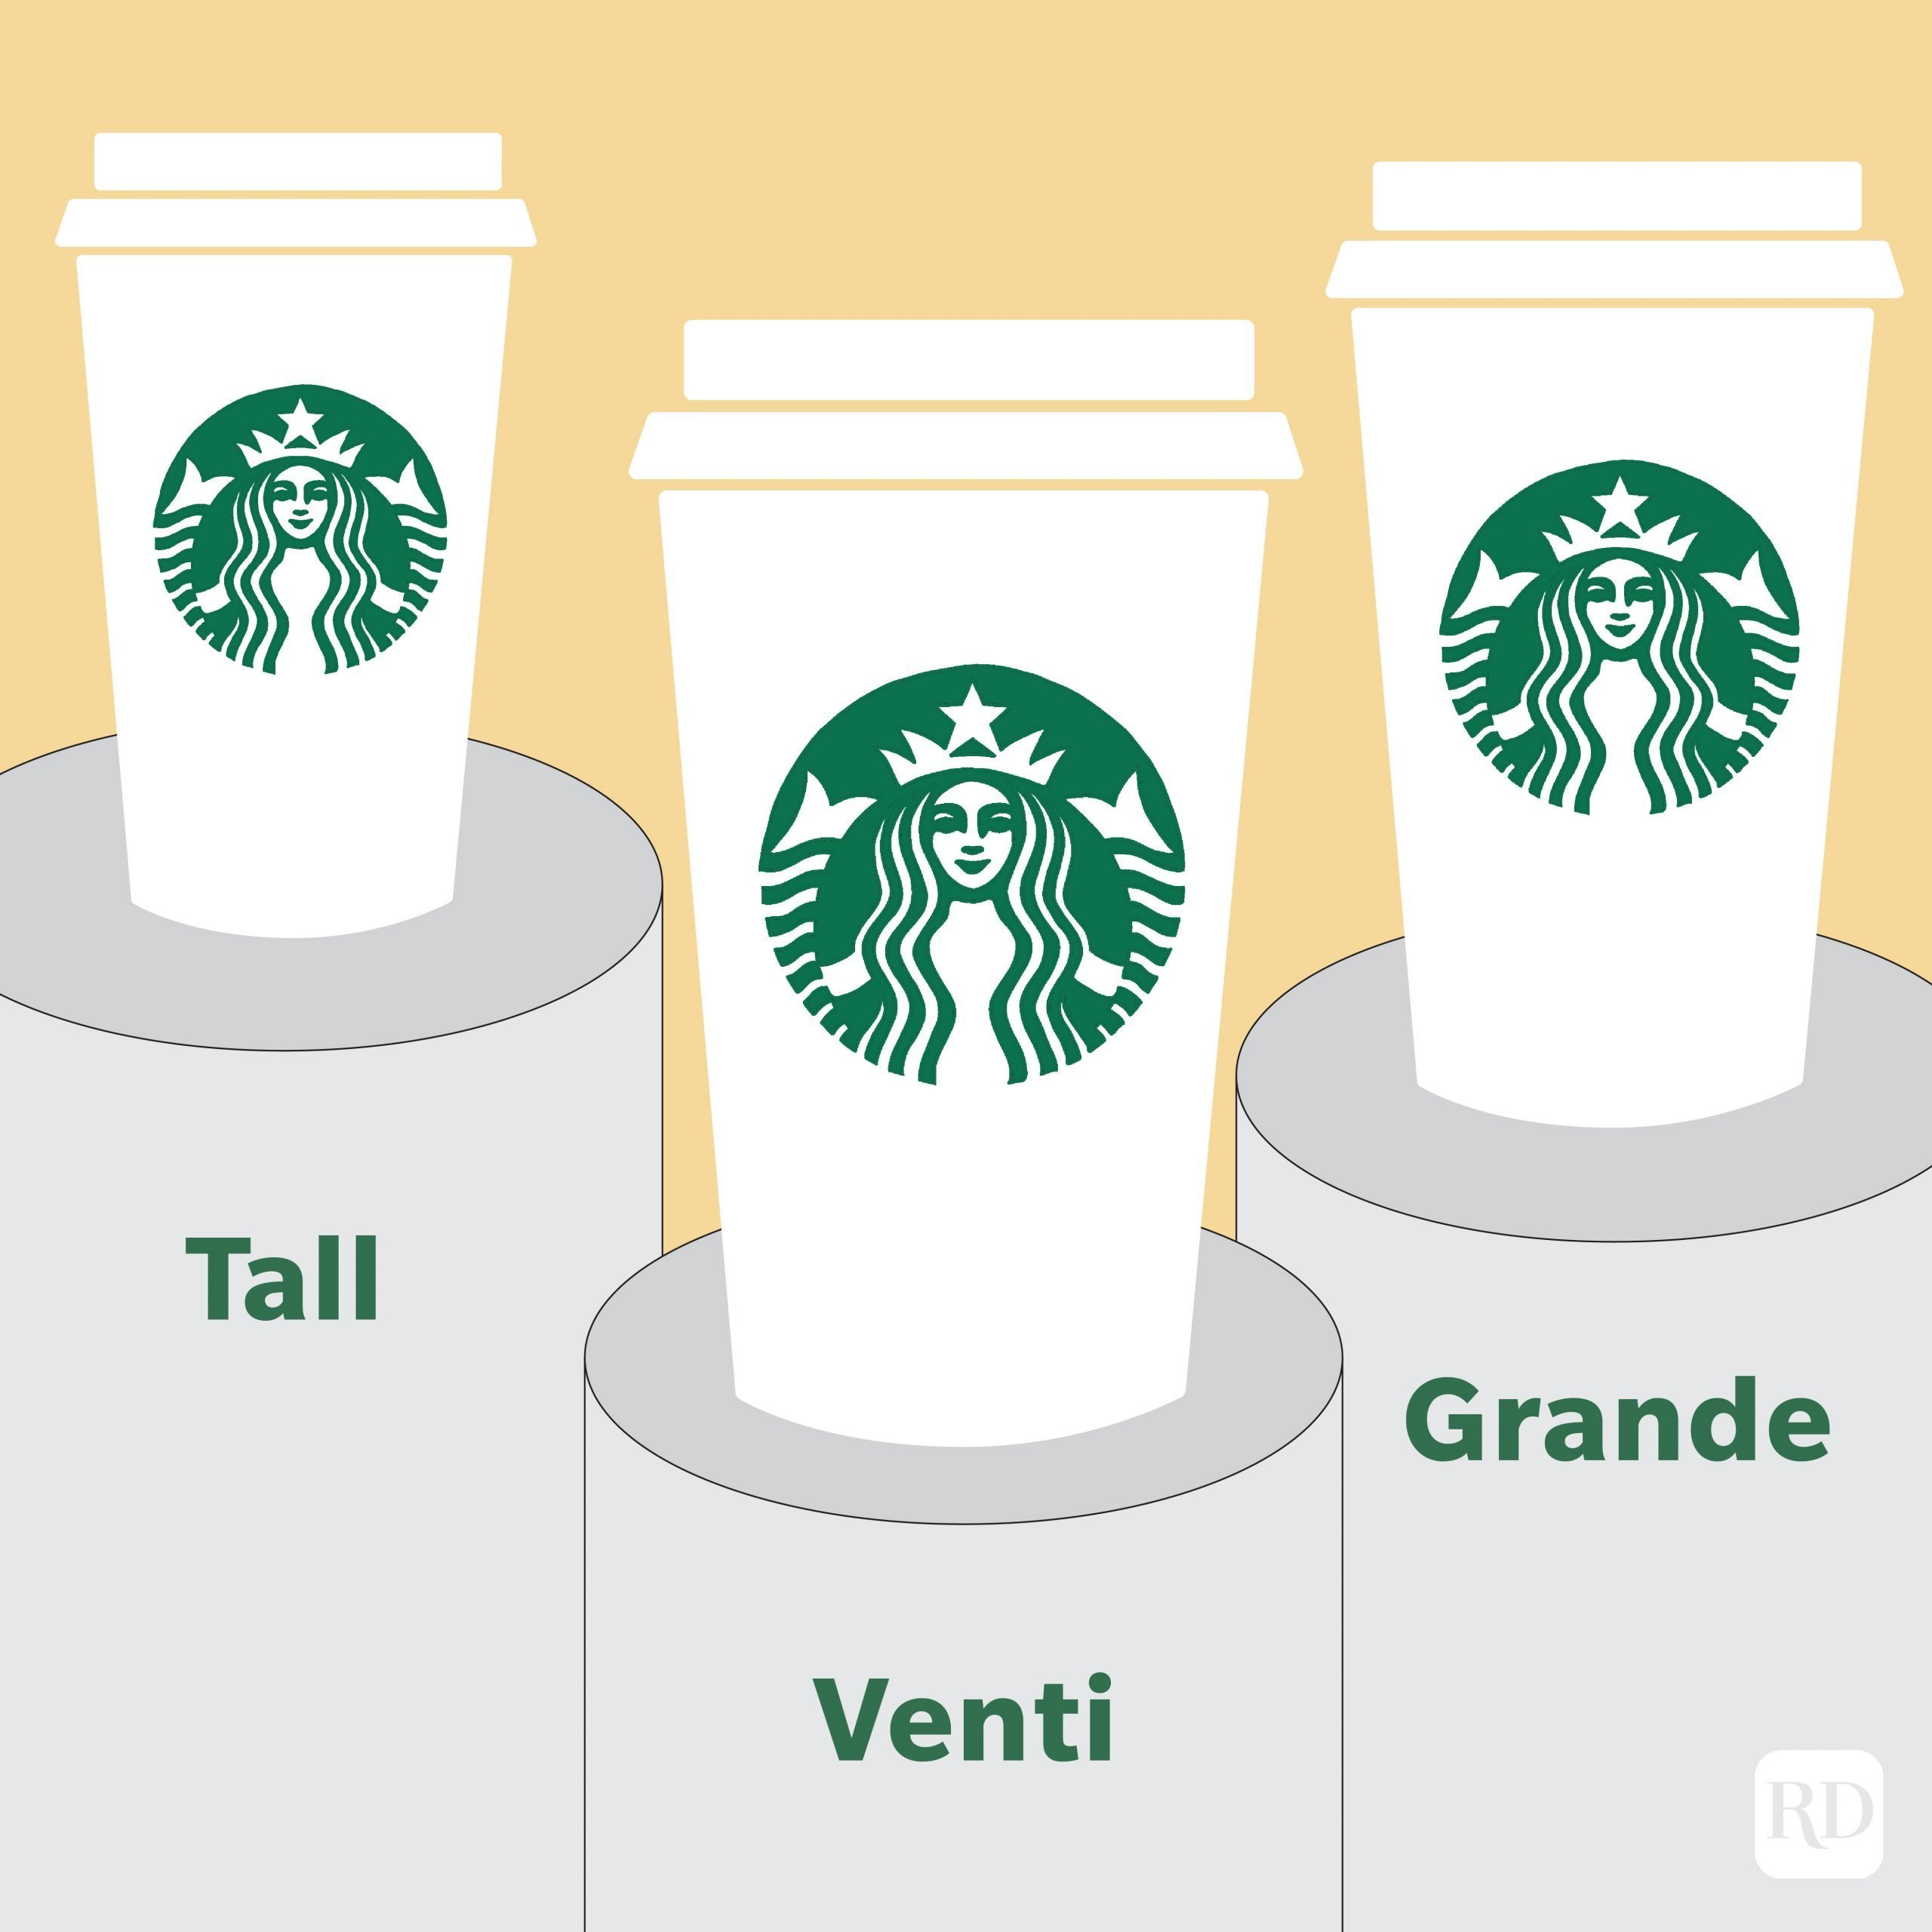 https://www.rd.com/wp-content/uploads/2020/03/starbucks-cup-sizes-opener-graphic-01-scaled.jpg